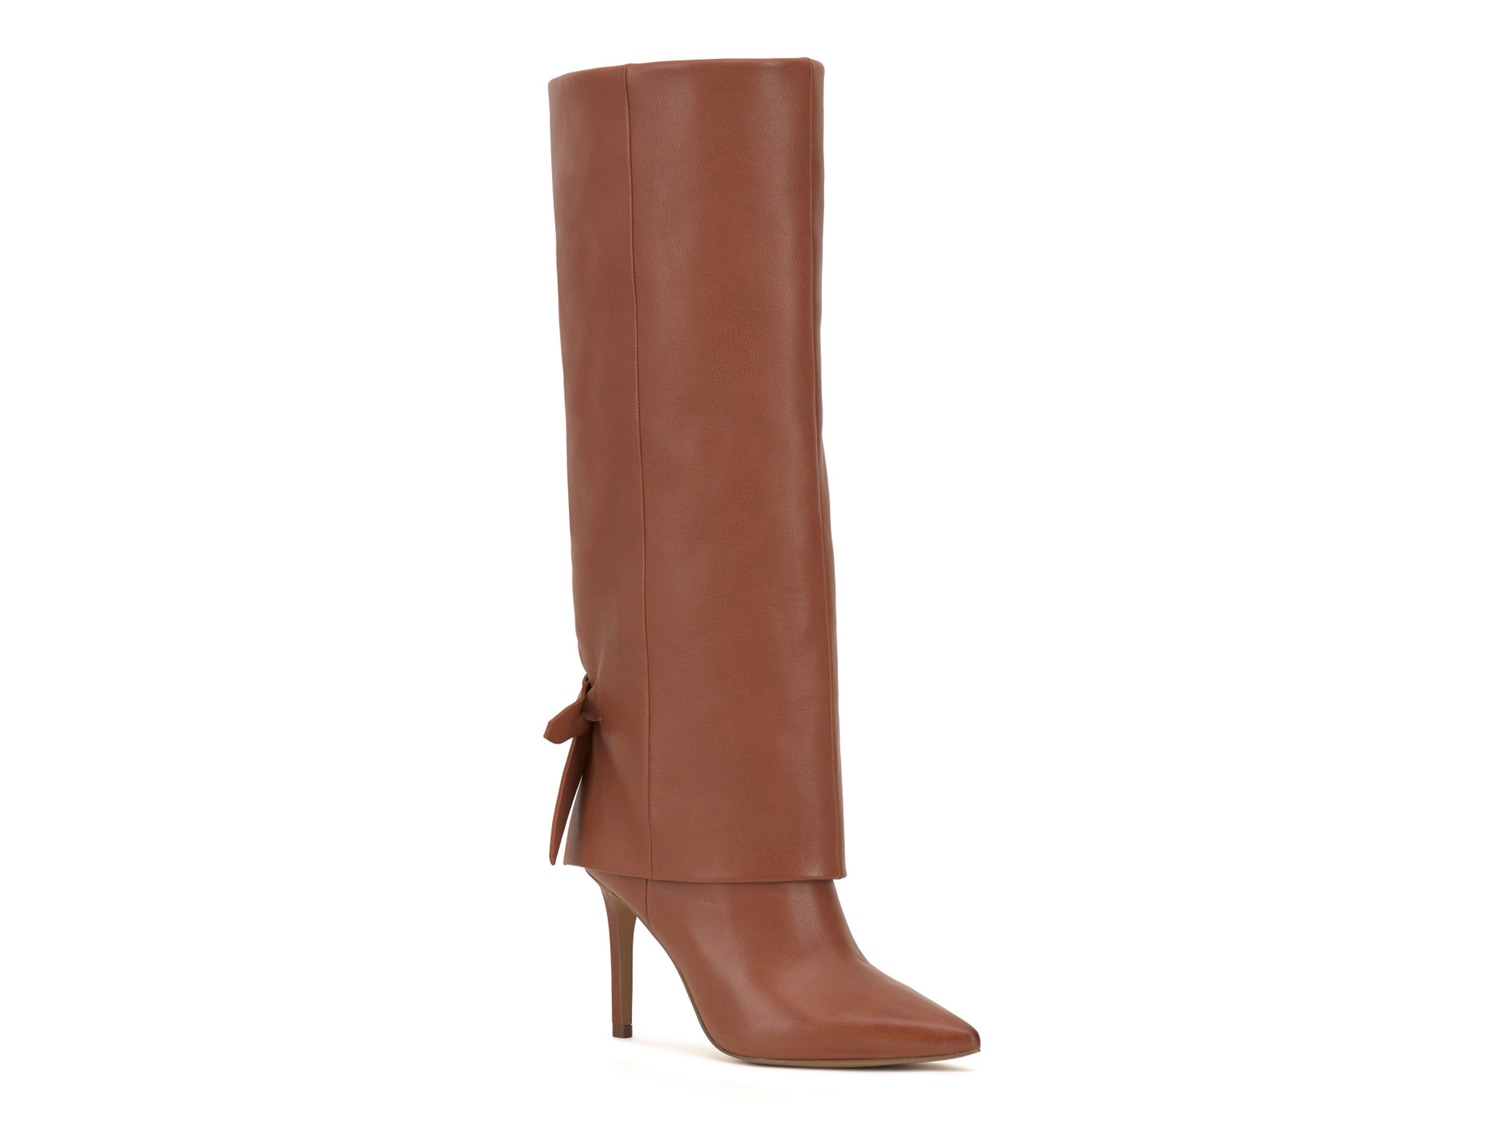 Vince Camuto Kammitie Foldover Boot - Free Shipping | DSW